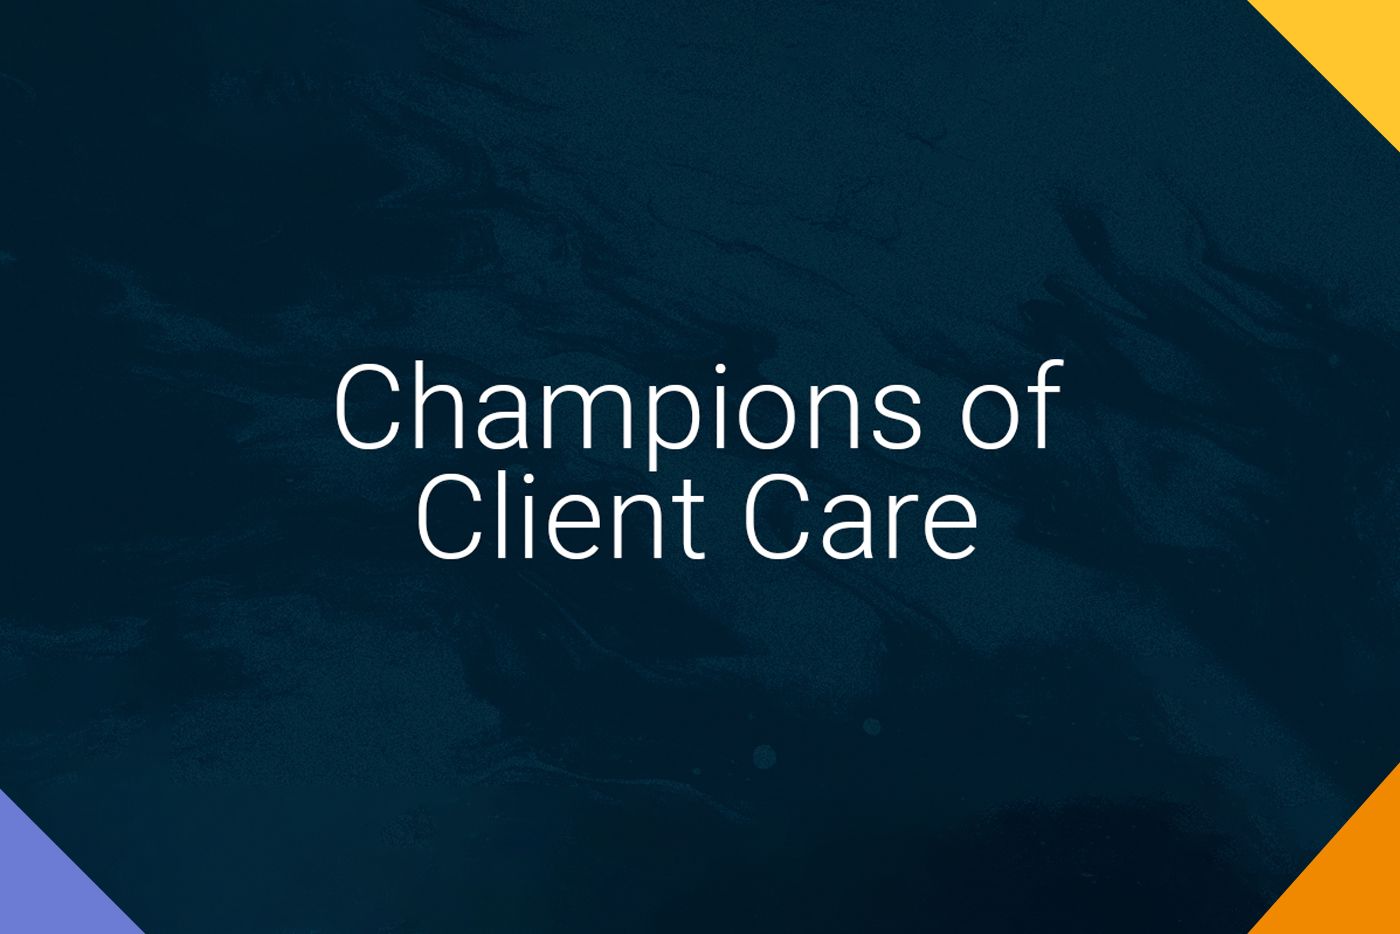 champions-of-client-care.jpg